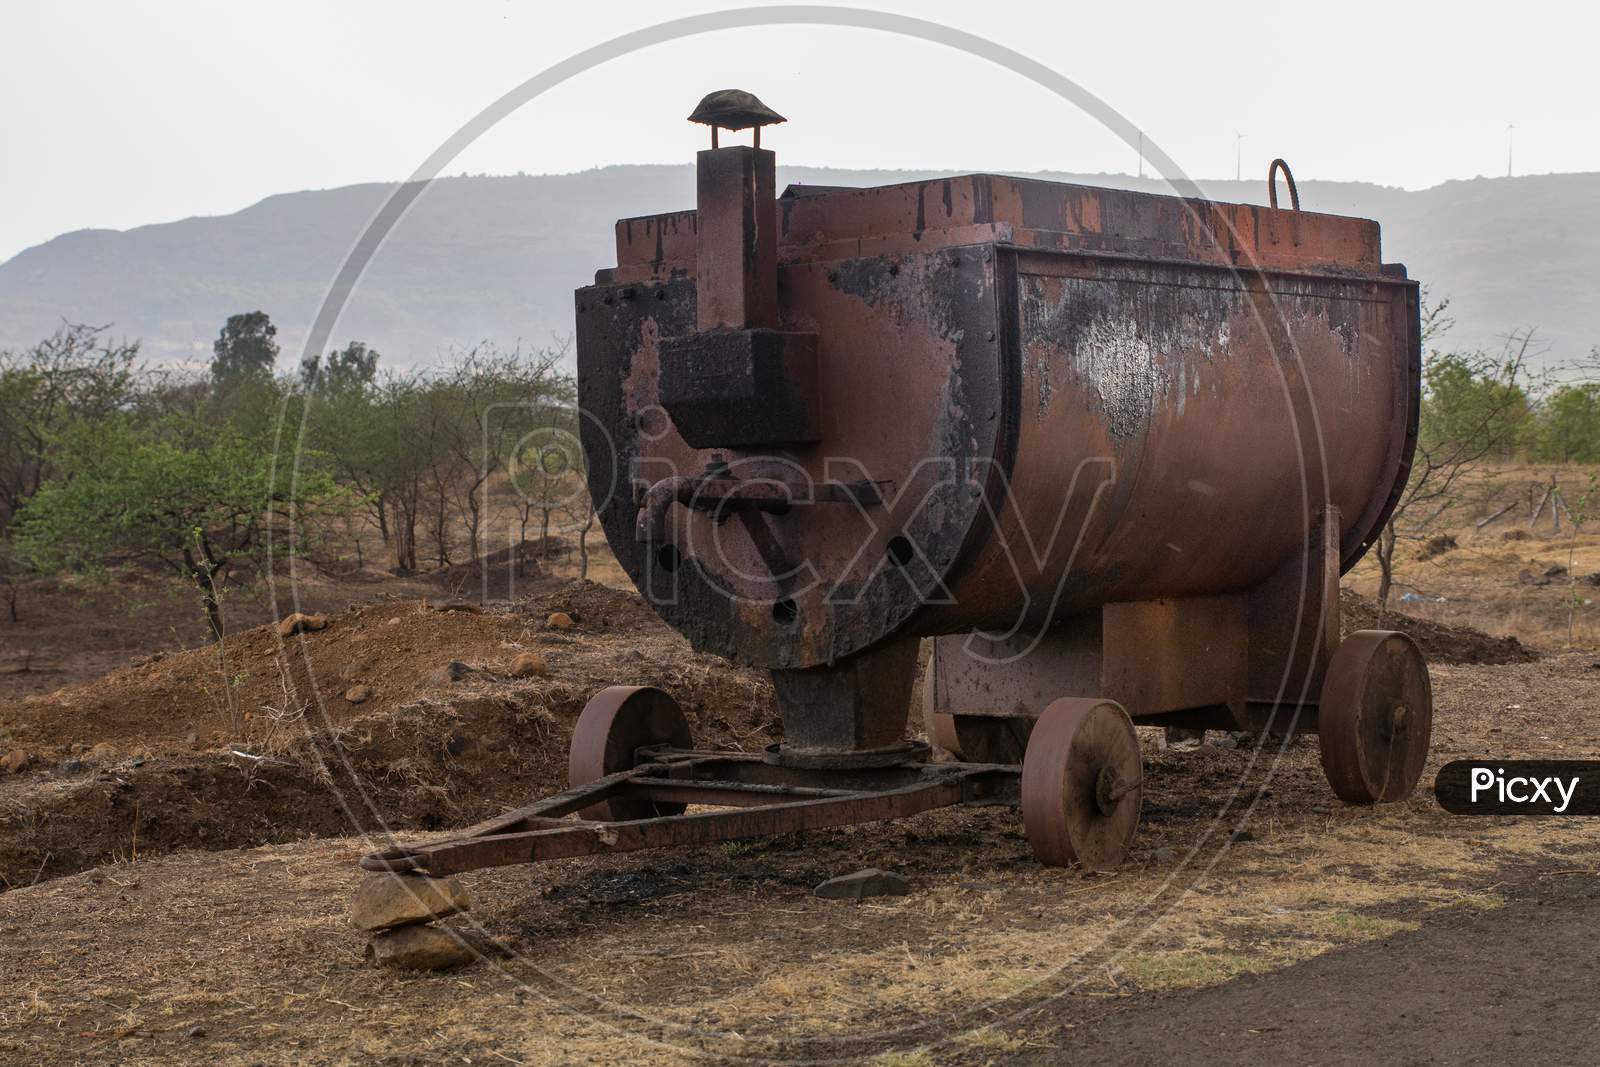 Front View Of A Mobile Tar Or Bitumen Melting Furnace Used In Road Construction